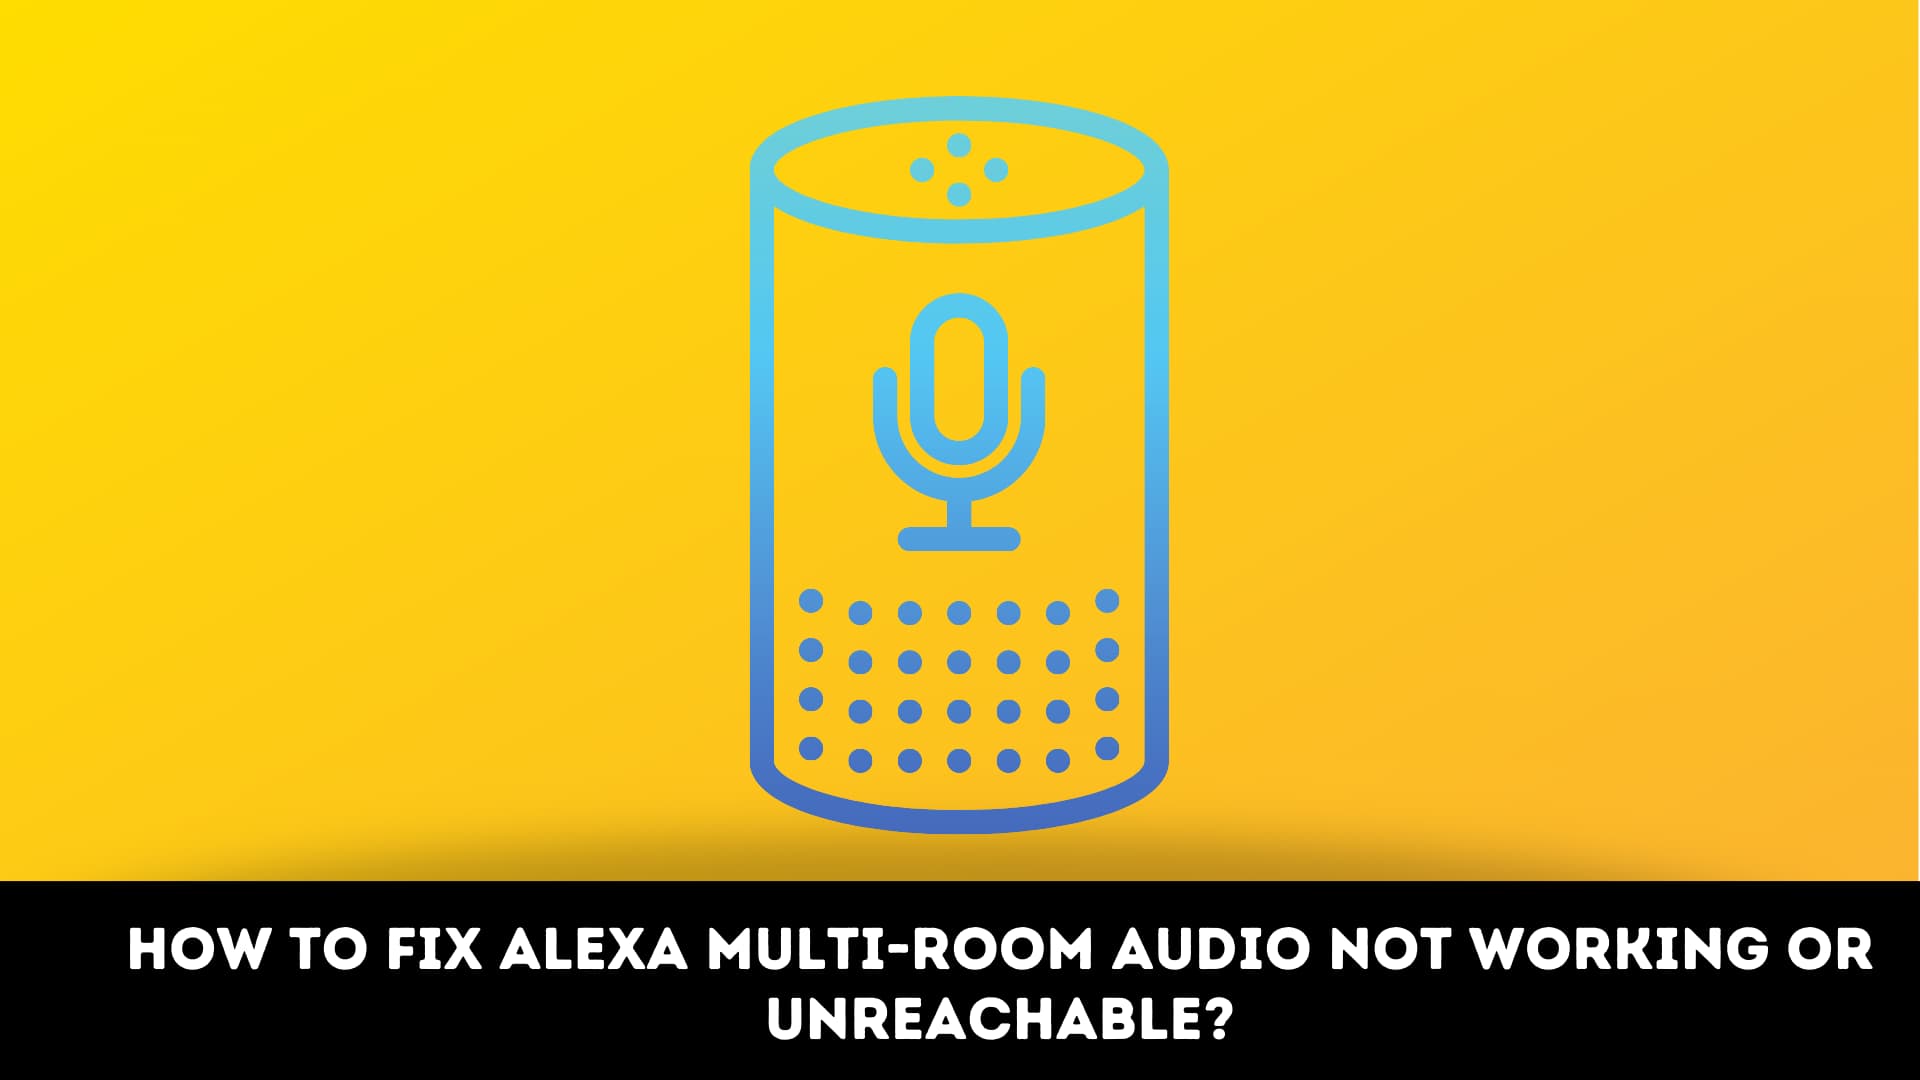 How to Fix Alexa Multi-Room Audio Not Working or Unreachable?